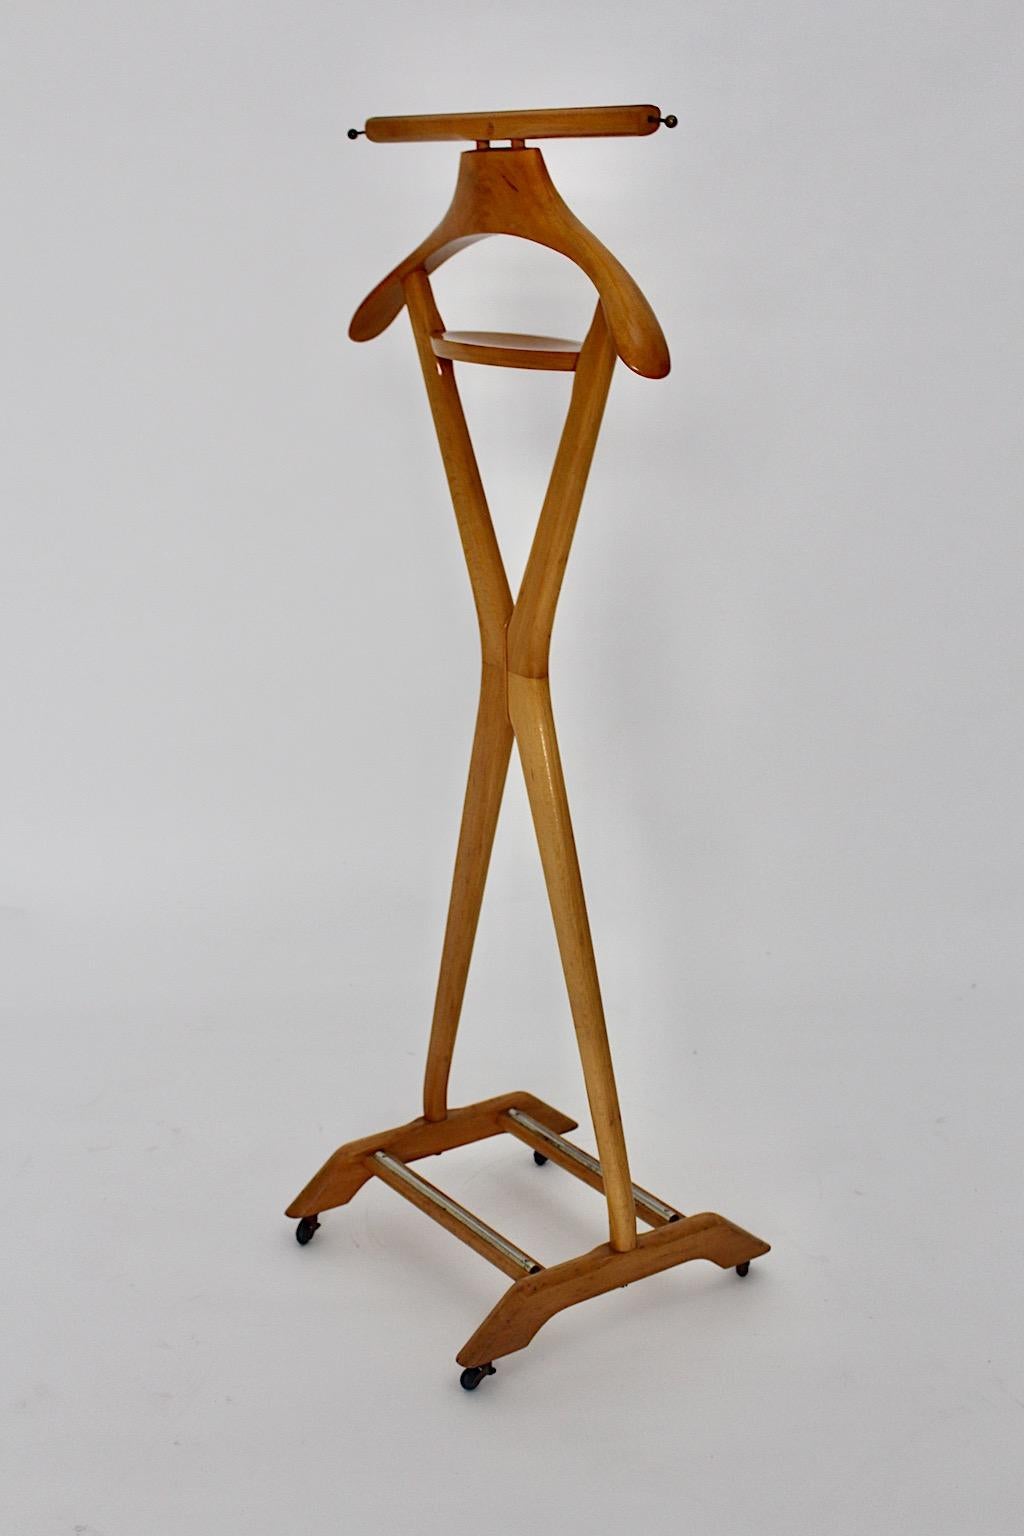 Mid-Century Modern vintage valet or coat rack from solid beech Ico & Luisa Parisi Style 1950s Italy.
The valet shows wonderful design features like a reduced x like form and brass details.
Four wheels and one tray for your bric-a brac.
Labeled